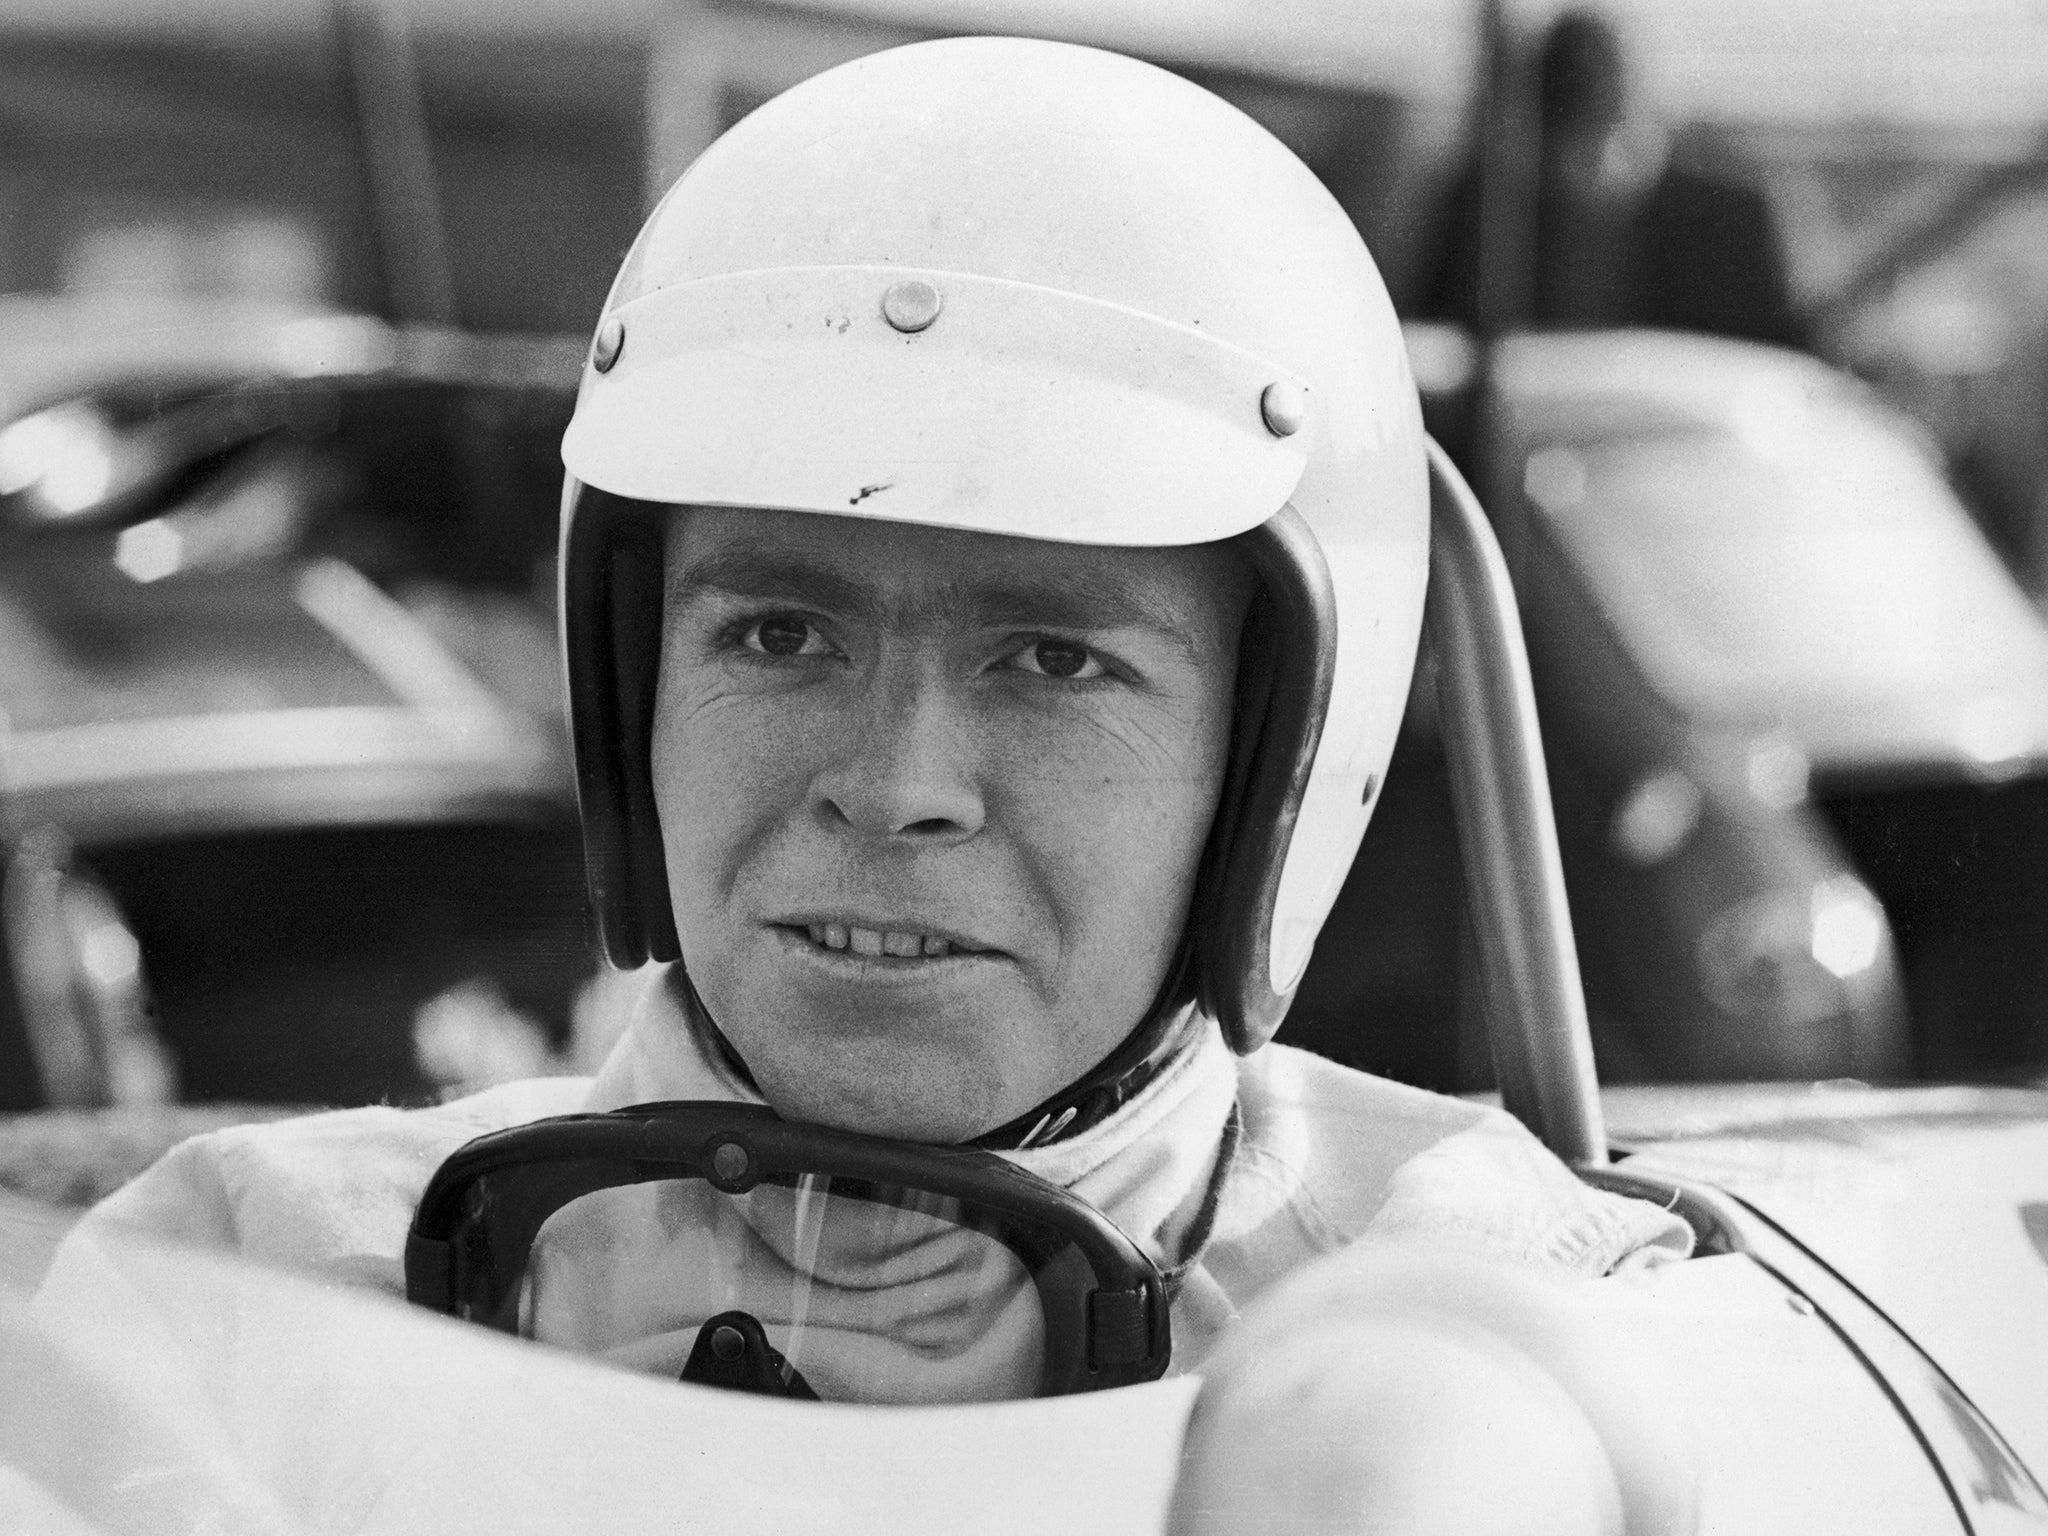 Mosley pictured in 1968, at the start of his motor racing career